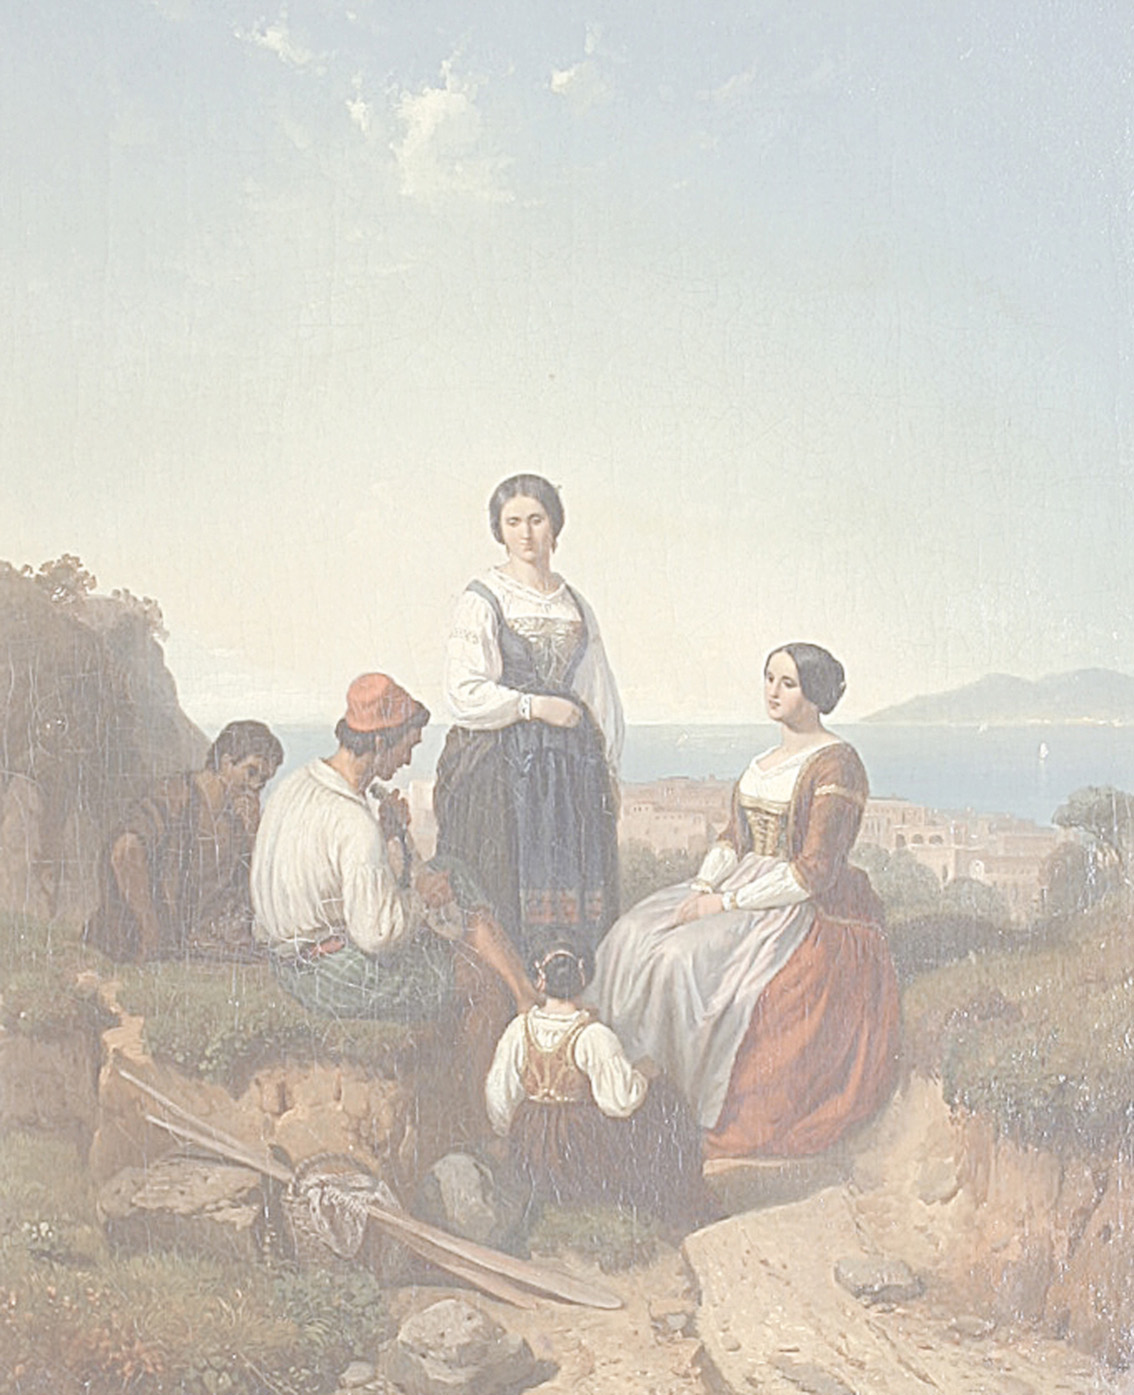 A group of figures with a fisherman making music